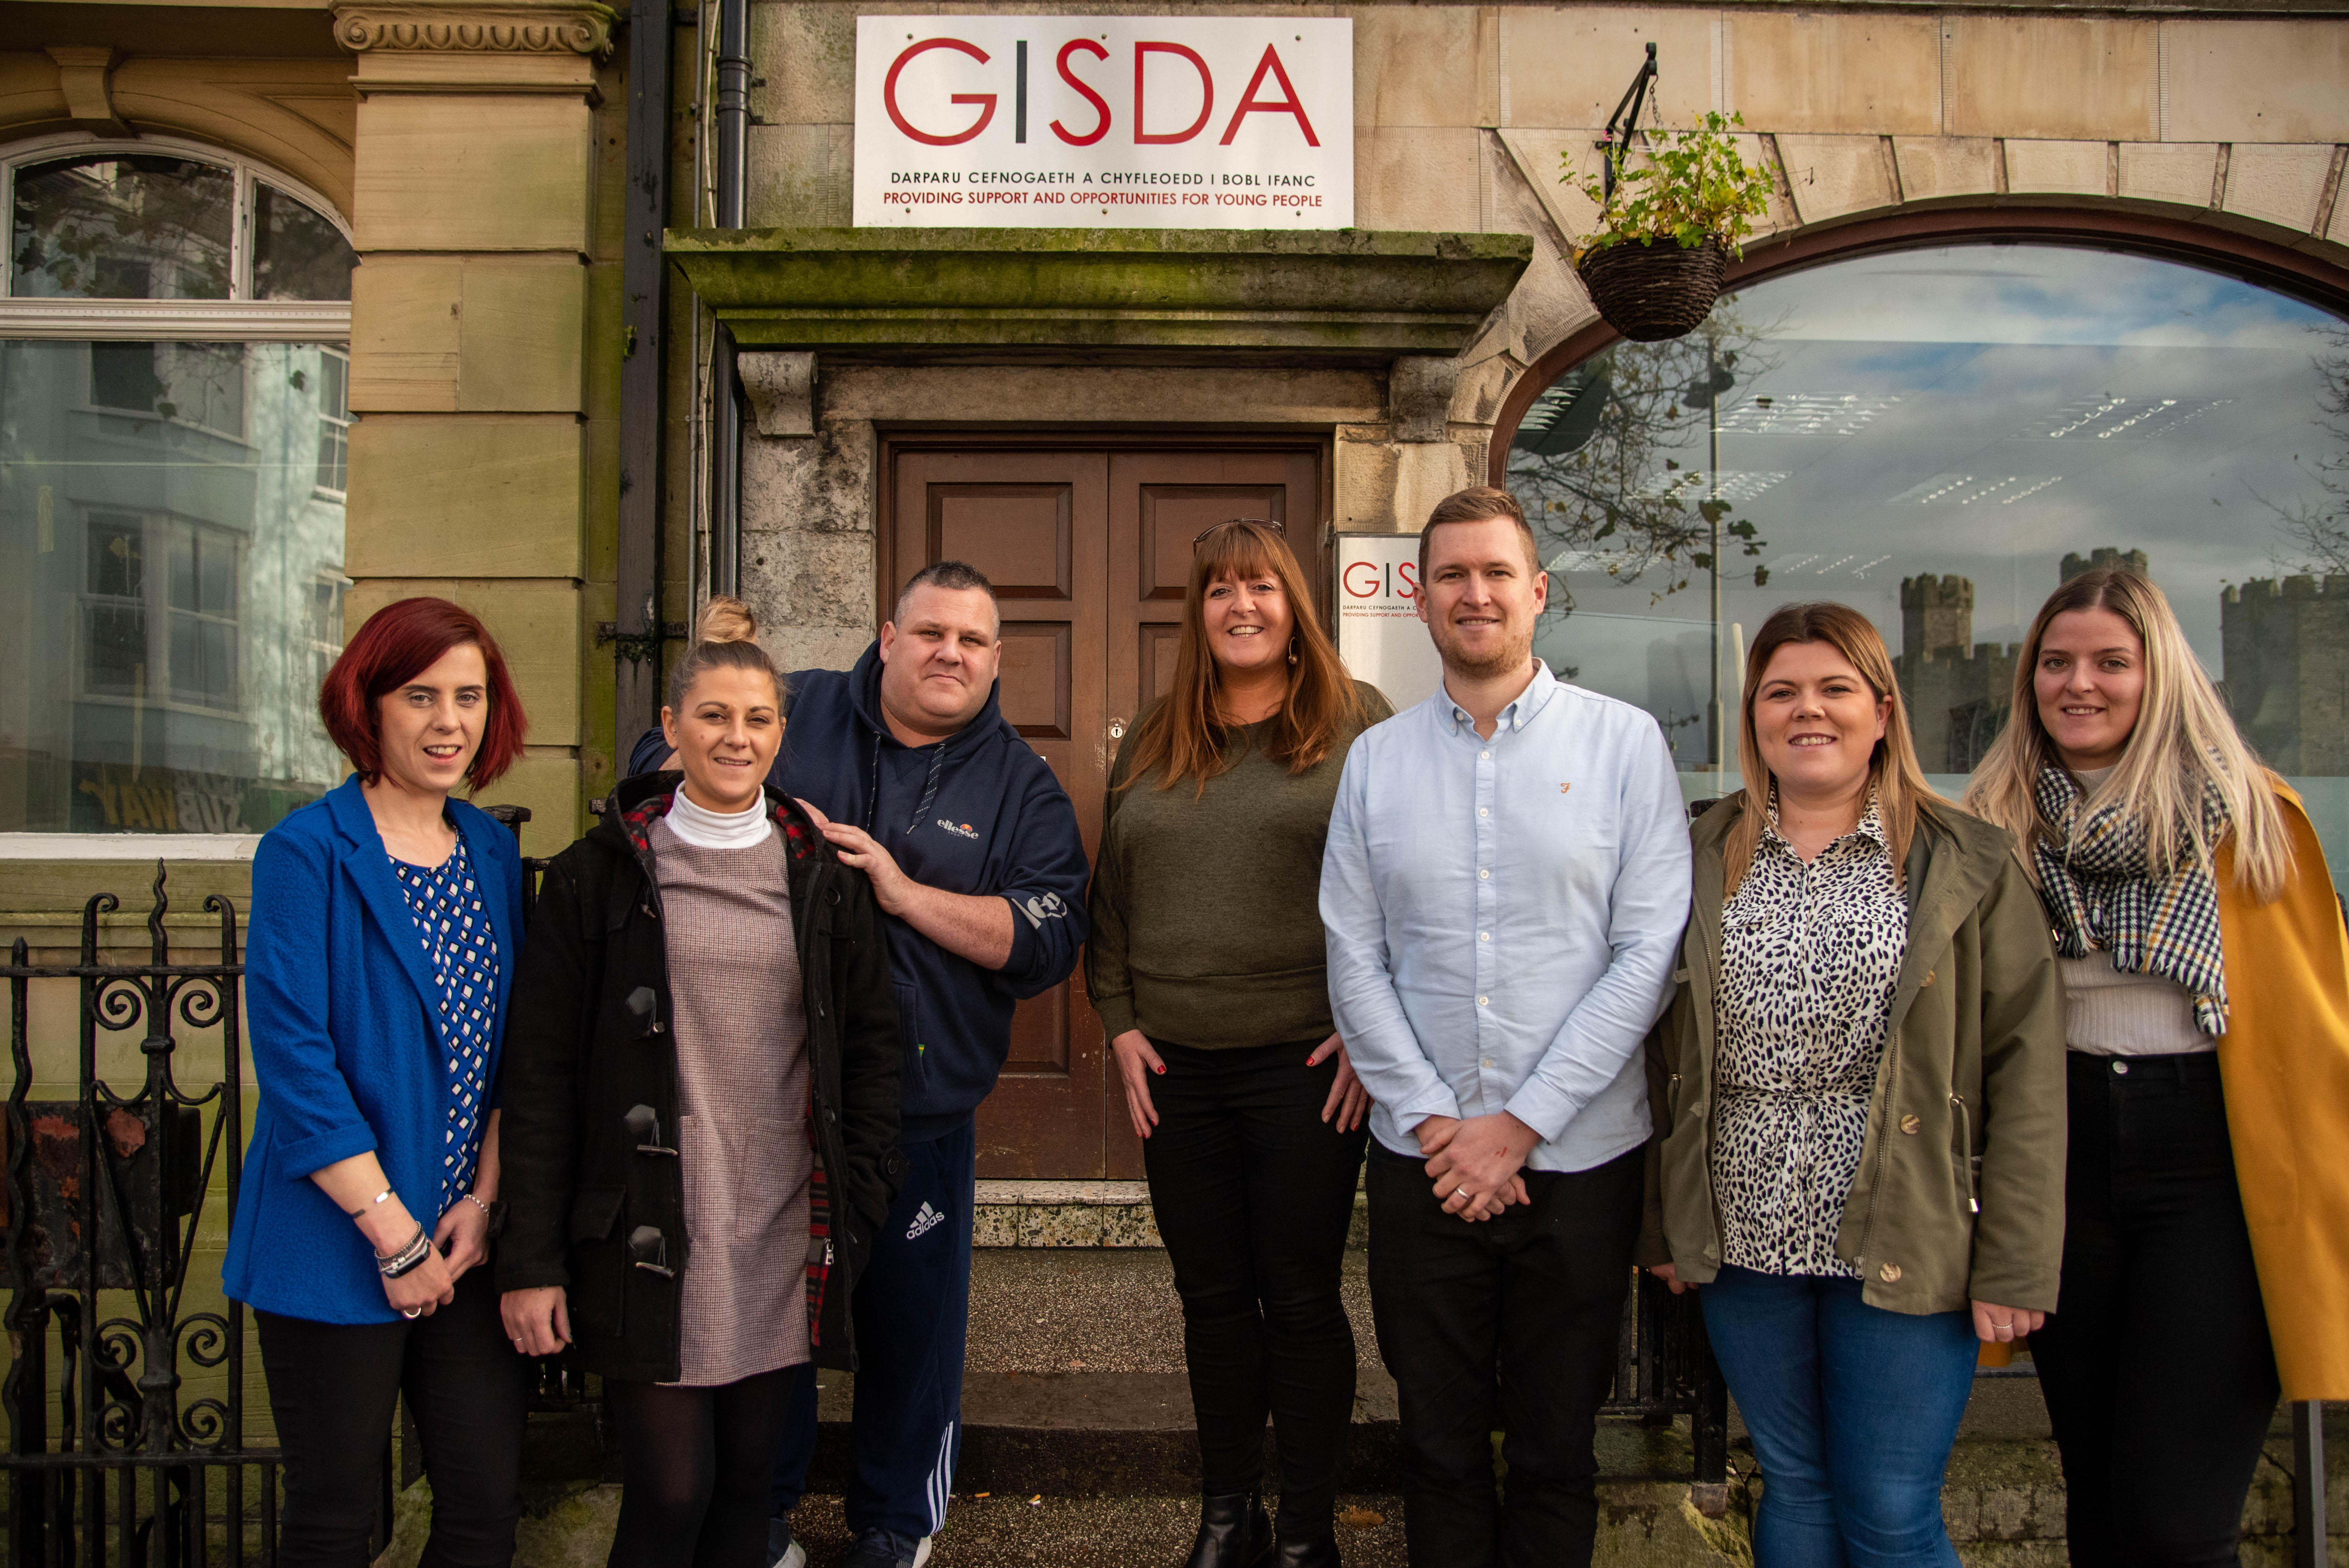 Pioneering £40,000 project launched by charity GISDA to prevent homelessness in Gwynedd